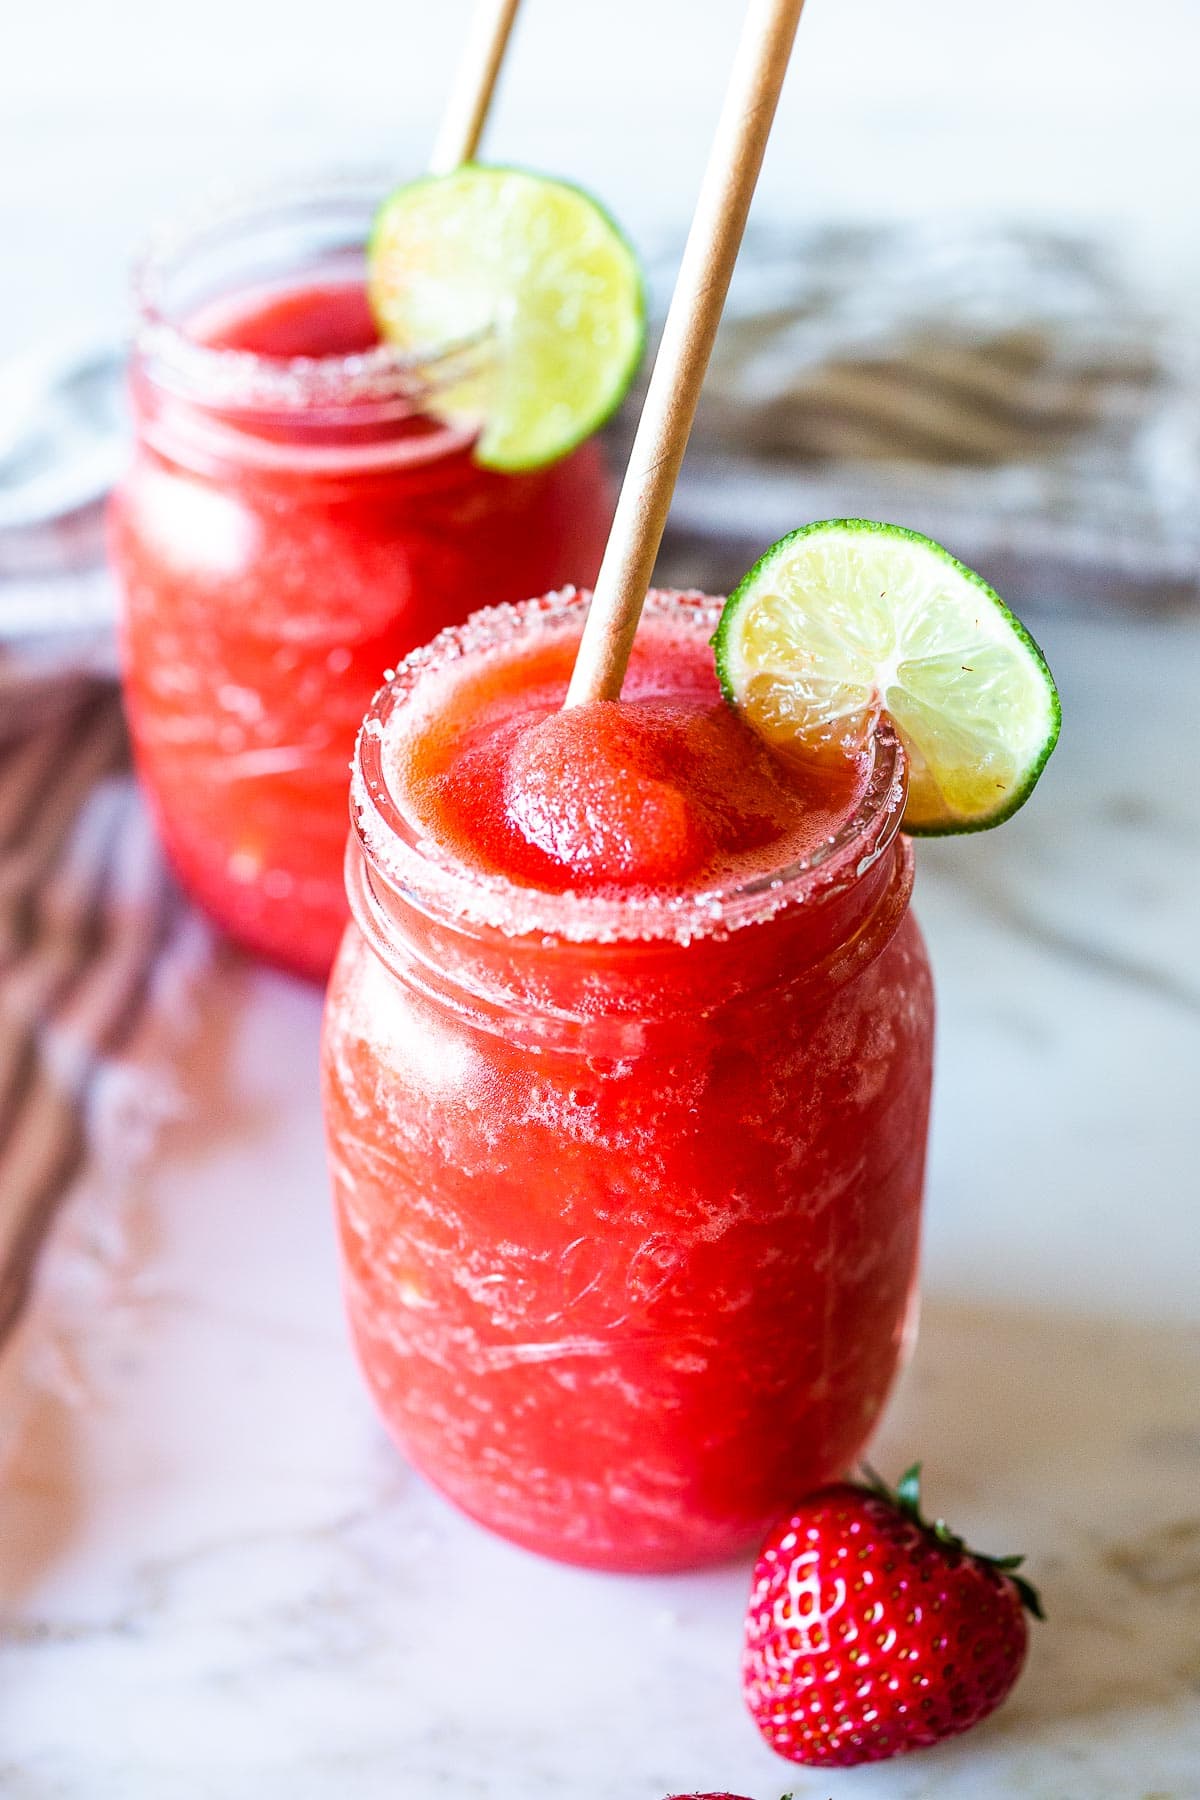 Say hello to the best Strawberry Margaritas made with  fresh, ripe, juicy strawberries! These "frozen" Strawberry Margaritas are light and refreshing and go down a little too easily! Naturally sweetened, nicely balanced with the best flavor! 